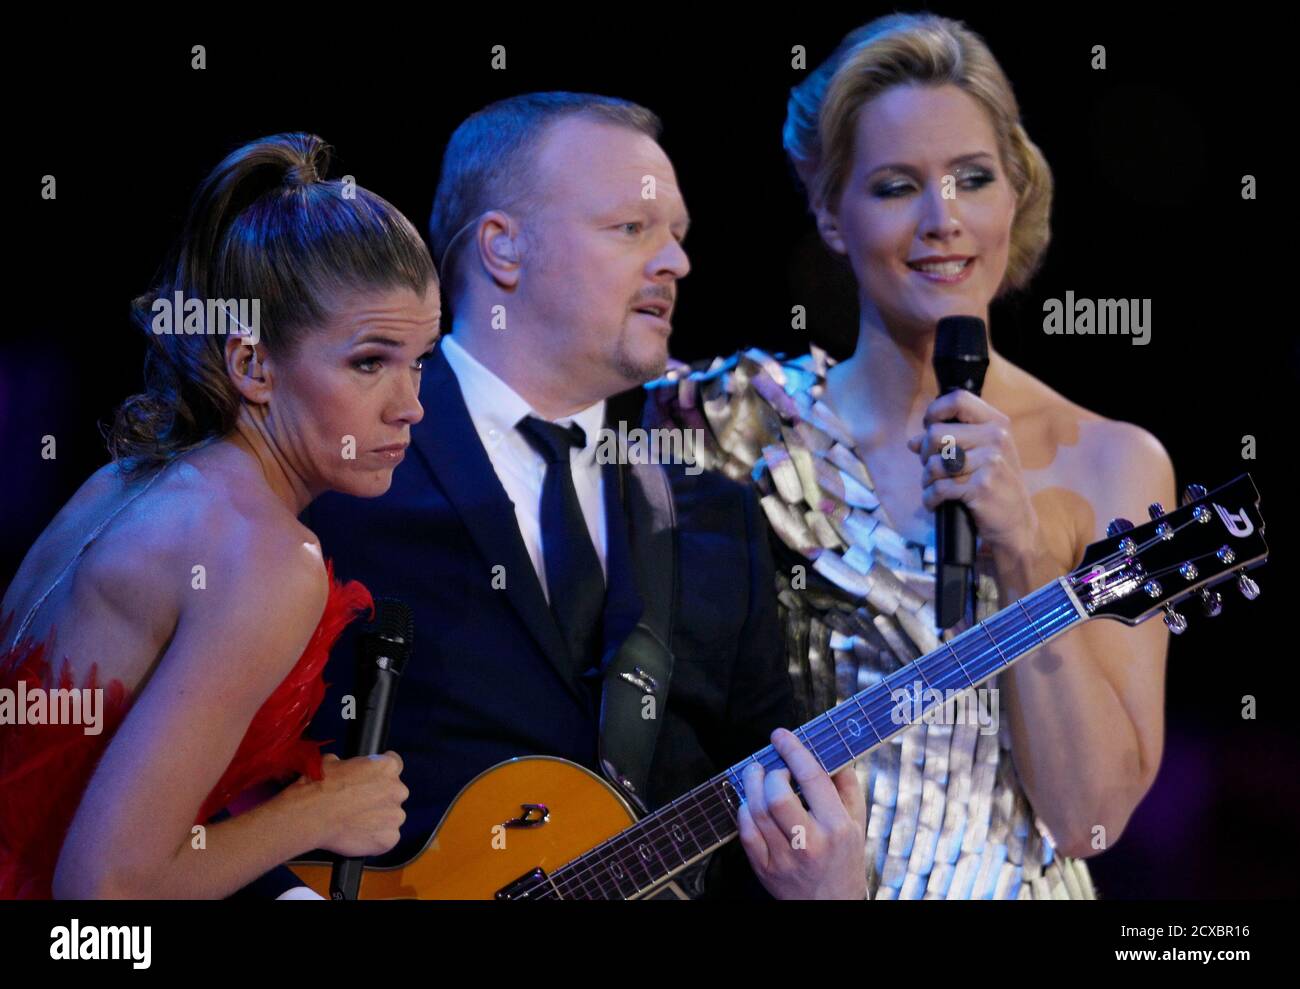 German TV entertainers and hosts of the Eurovision, Judith Rakers (R), Stefan Raab and Anke Engelke (L) perform during the Eurovision Song Contest final in Duesseldorf May 14, 2011.              REUTERS/Wolfgang Rattay (GERMANY  - Tags: ENTERTAINMENT) Stock Photo